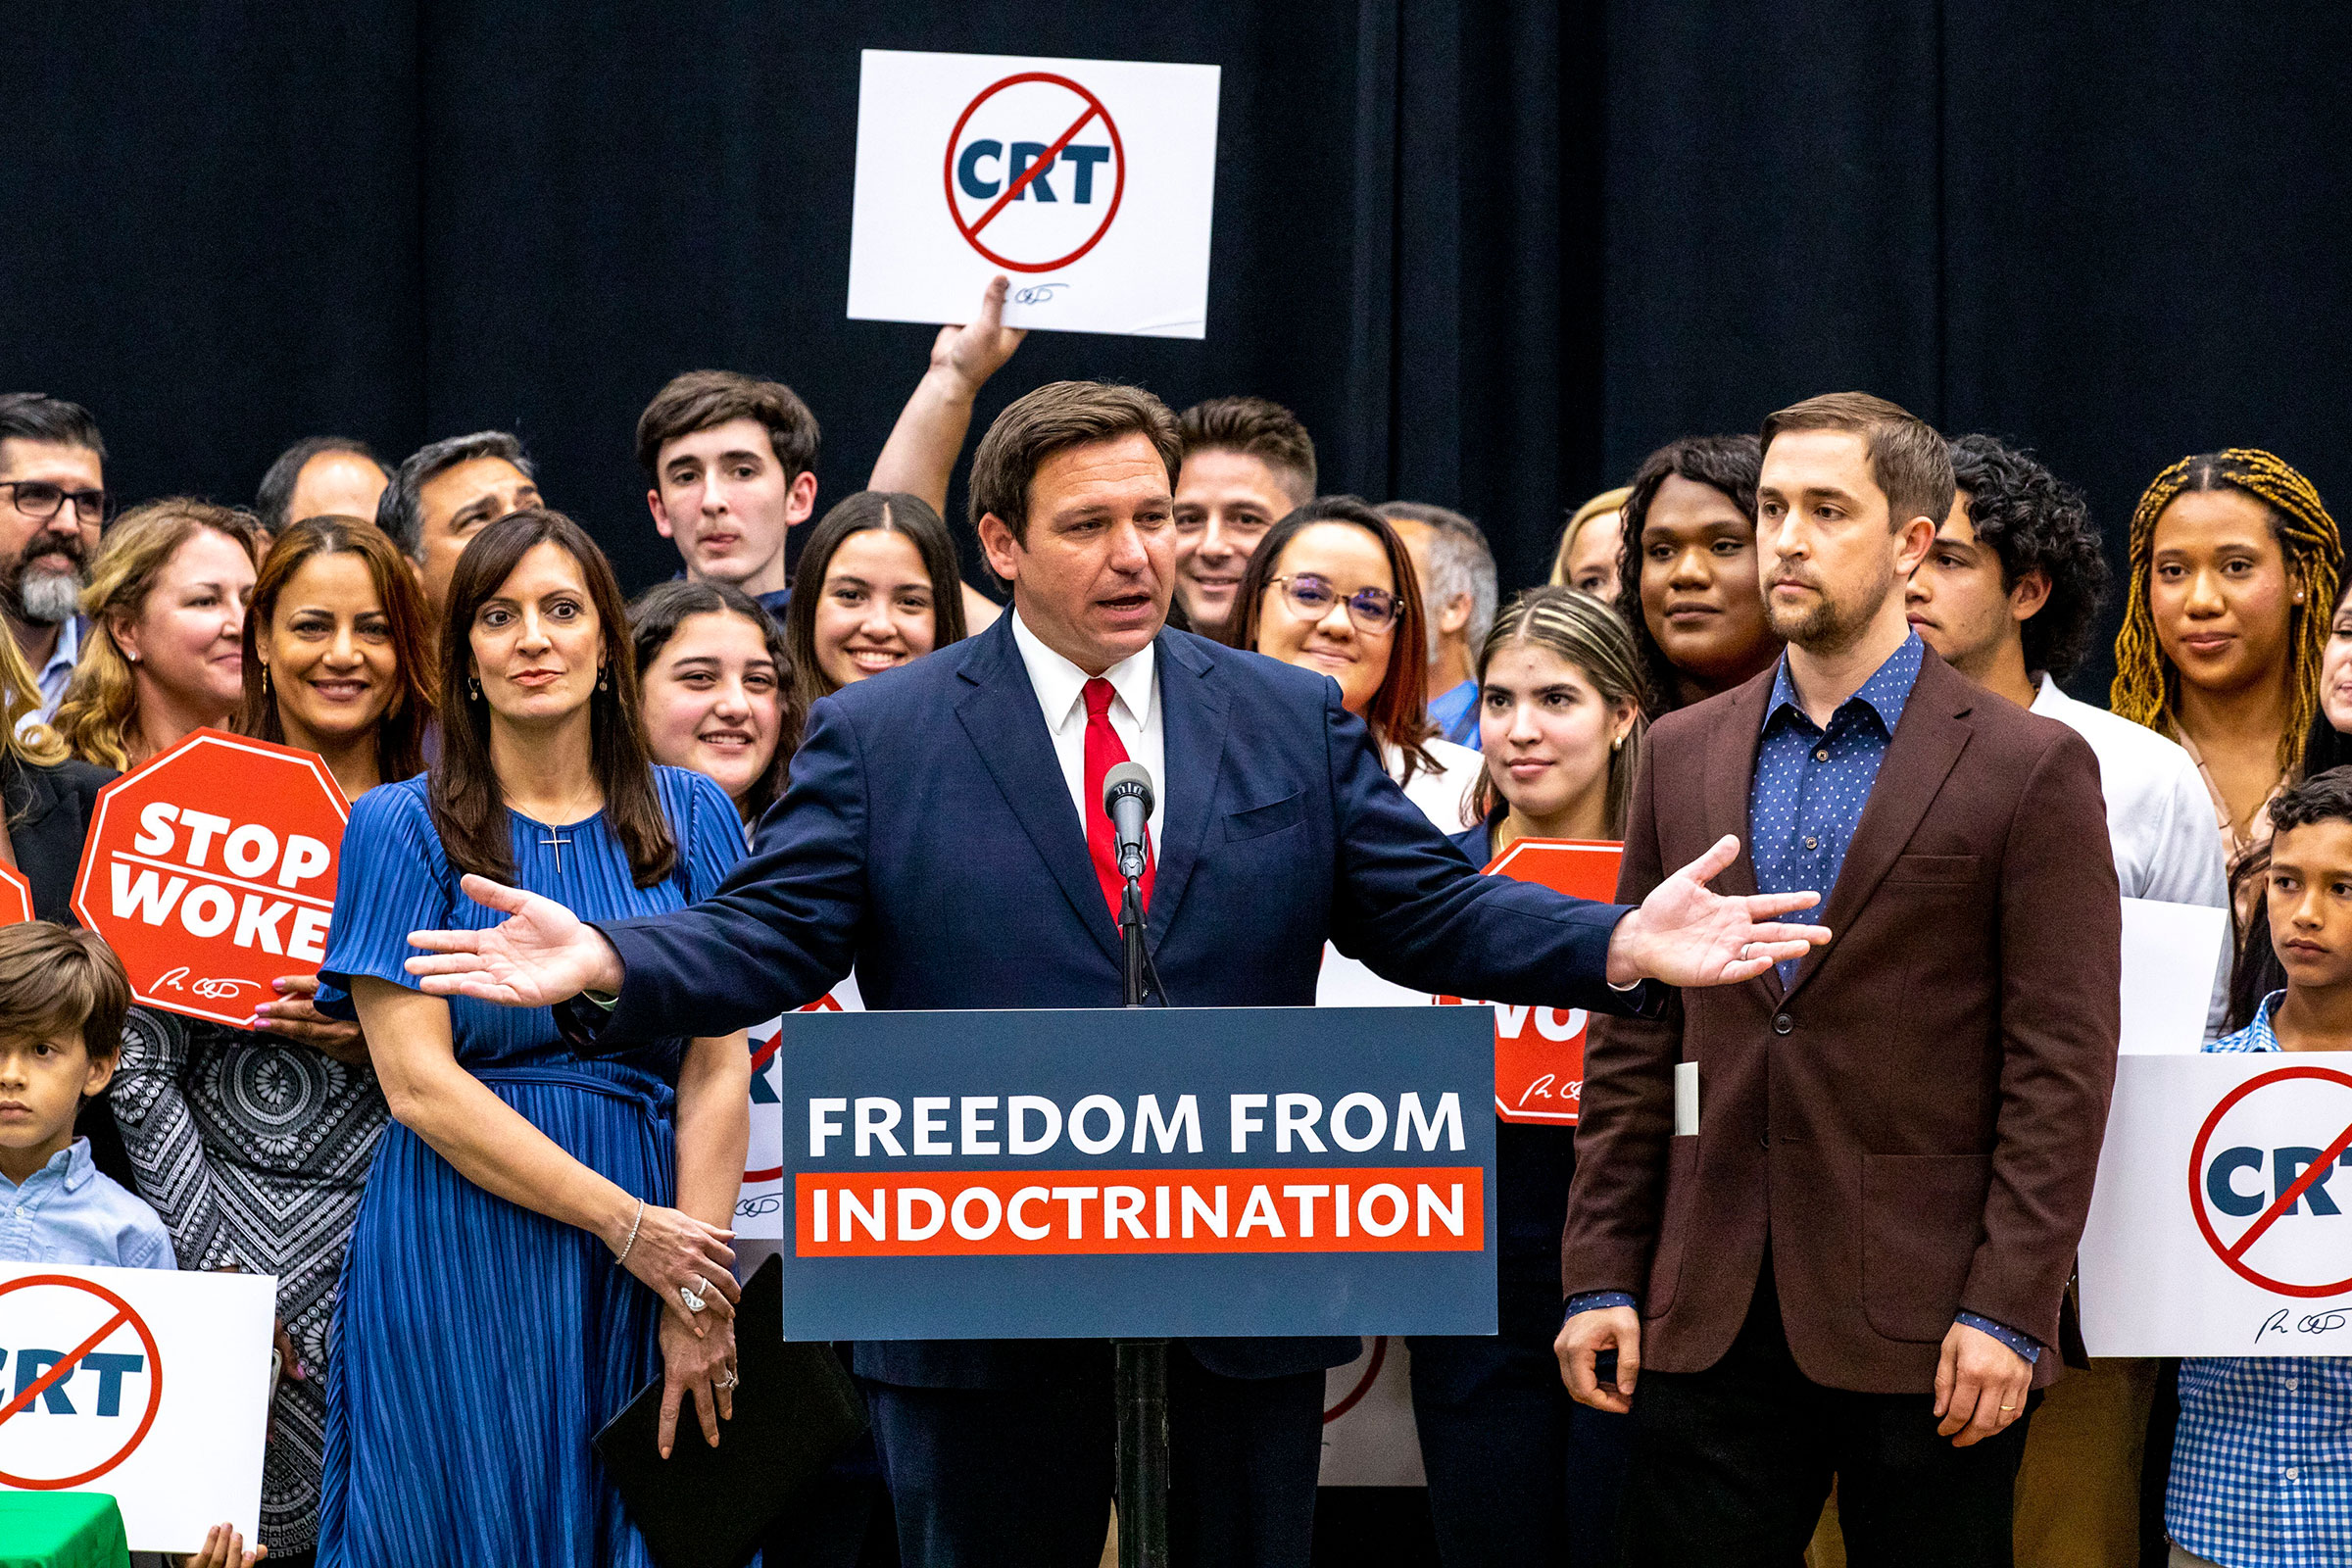 DeSantis addresses the crowd before publicly signing HB7, "individual freedom," also dubbed the "stop woke" bill during a news conference in Hialeah Gardens, Fla., on April 22, 2022